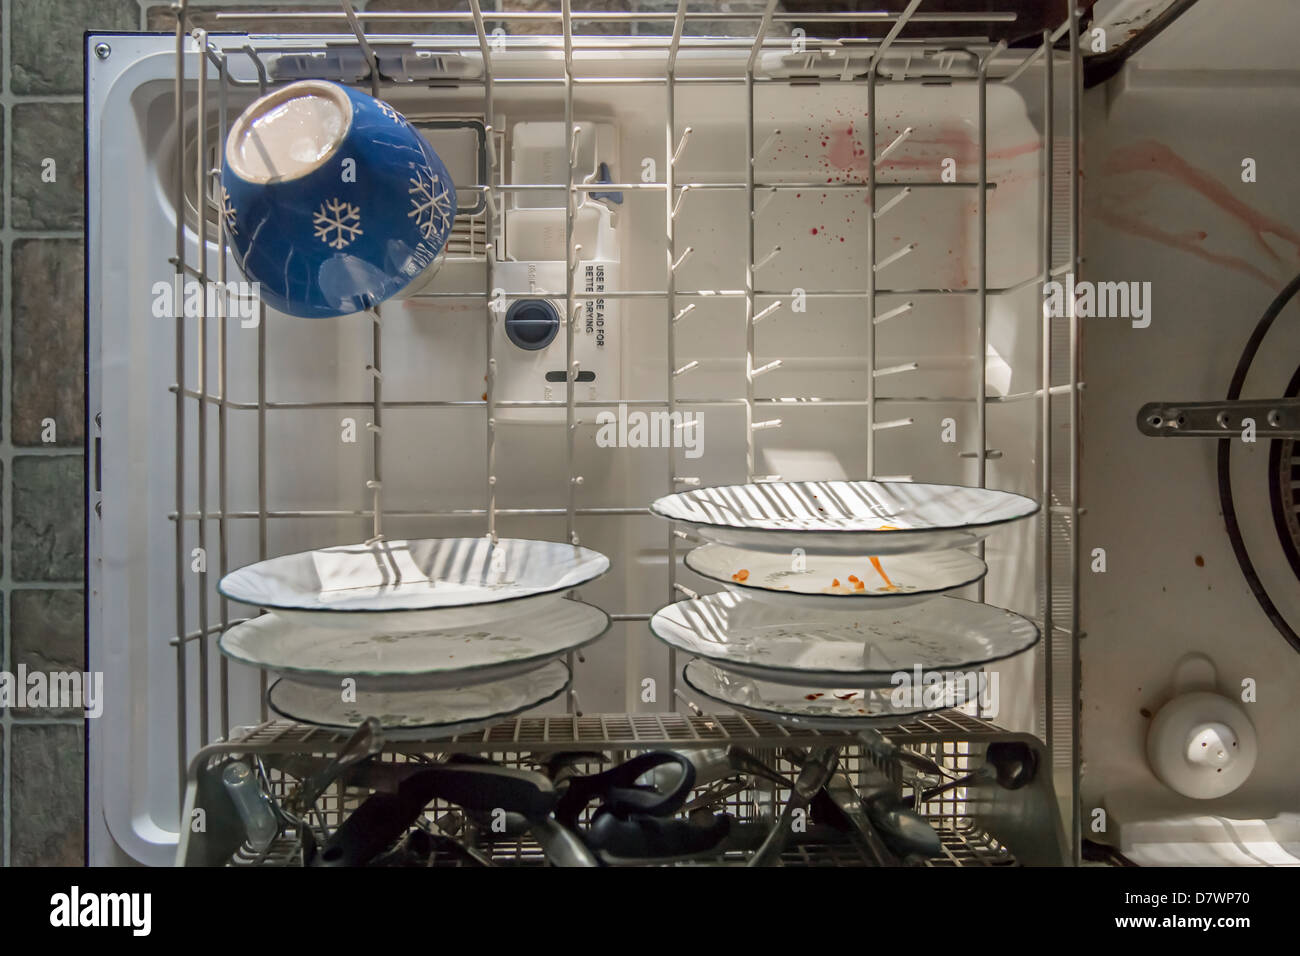 Dirty Dishes In Dishwasher Stock Photo